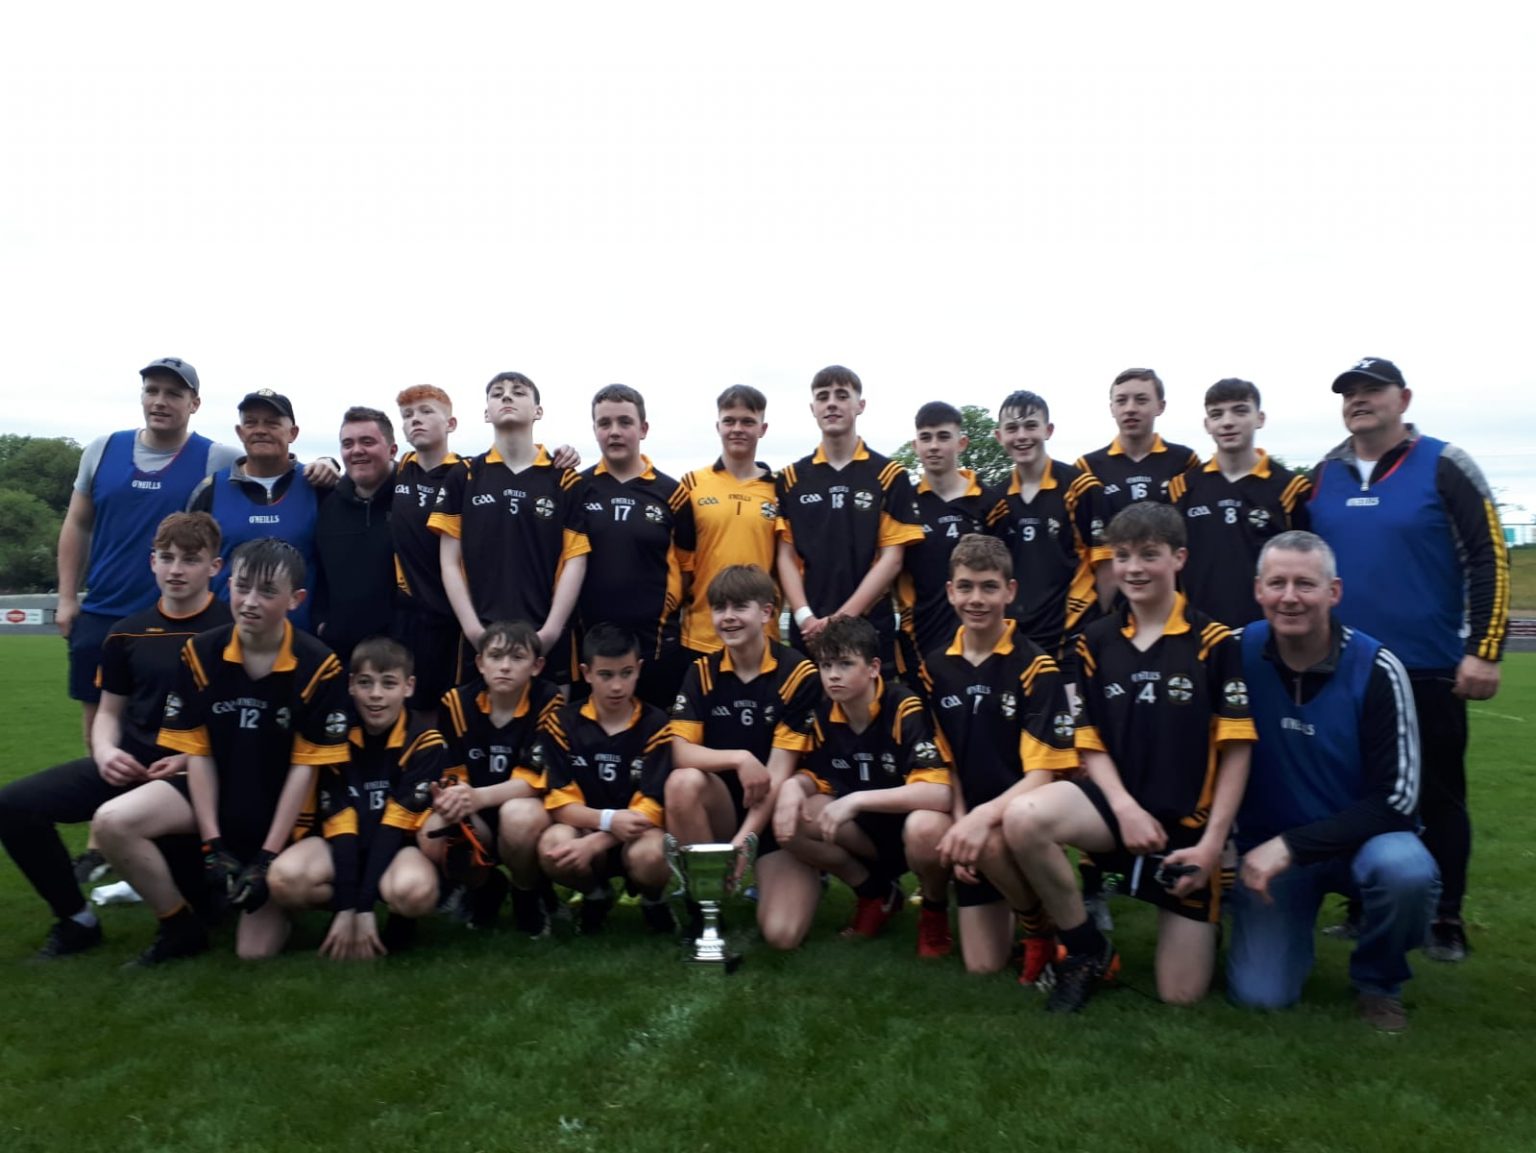 Naomh-Ultan-U-16-Team-winners-of-Division-2-League-and-Cahmpionship-1536x1153-1